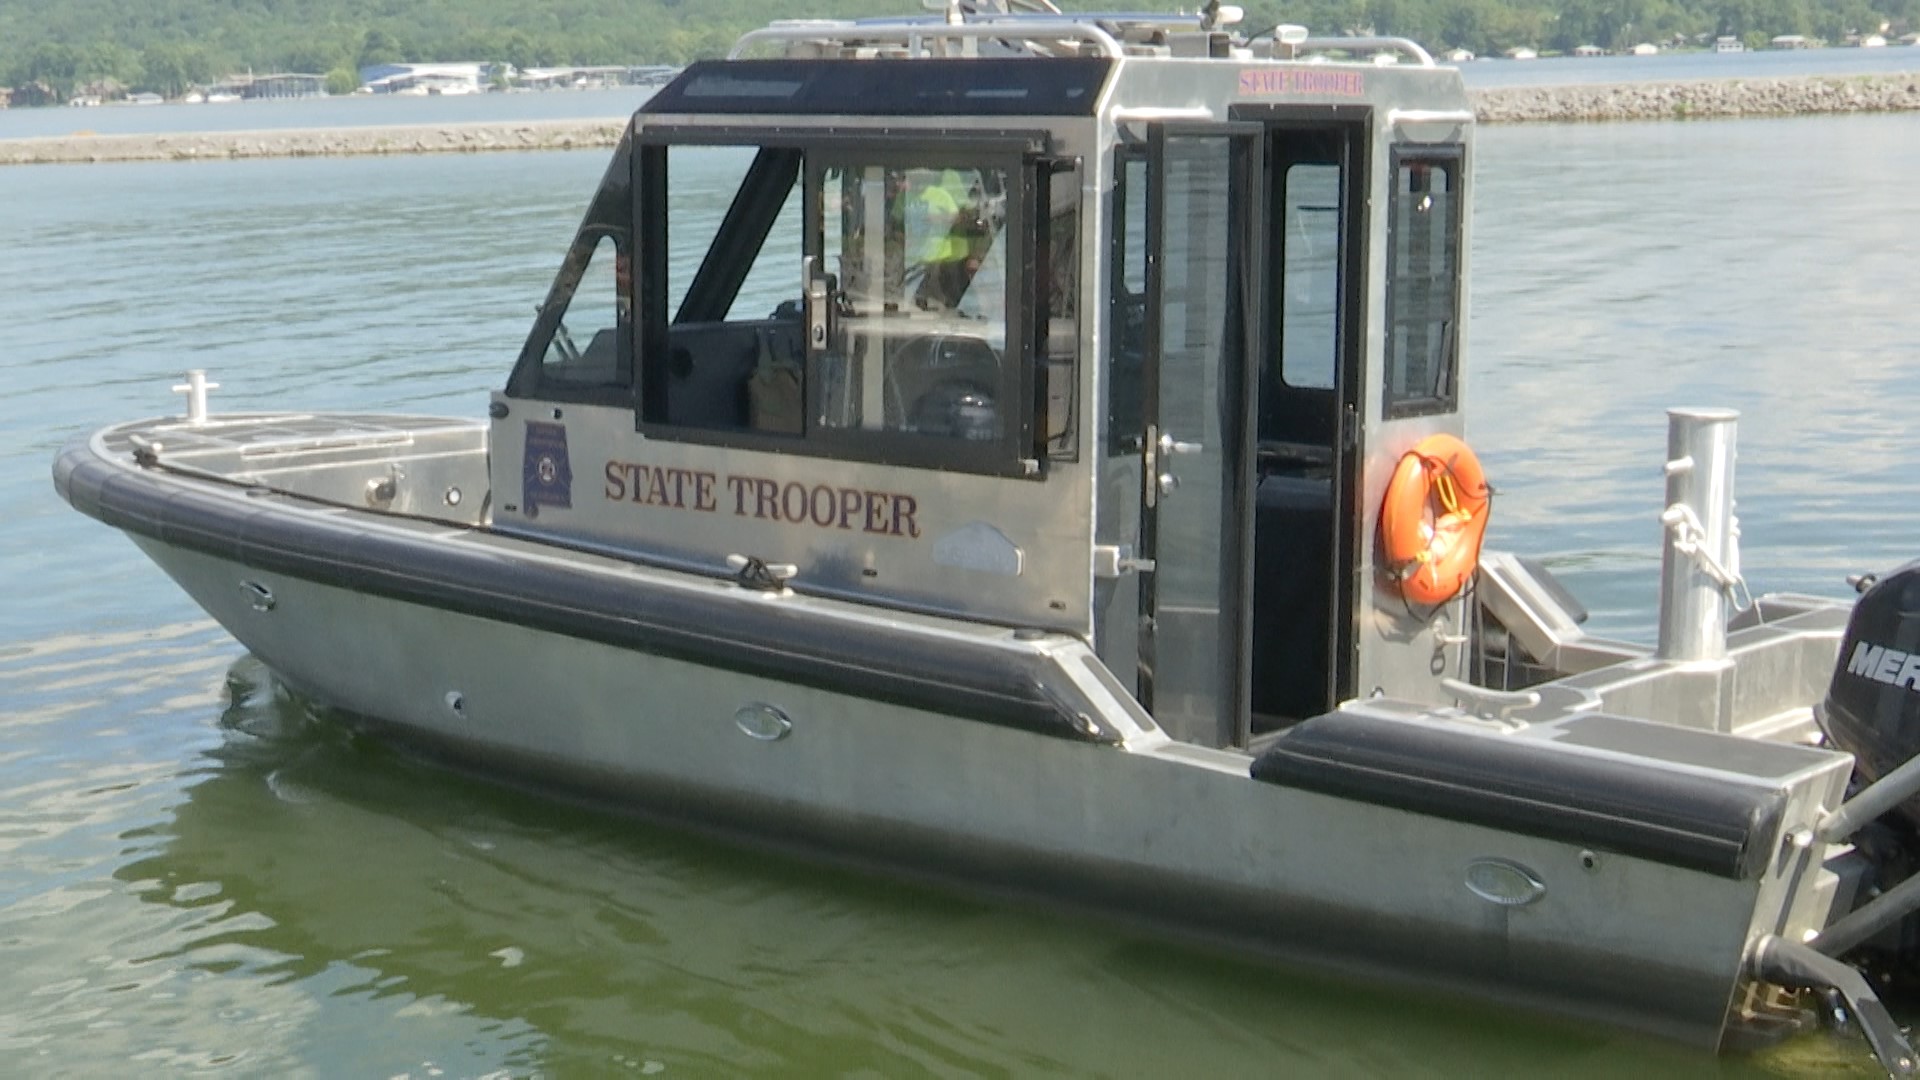 A senior trooper with the Alabama Law Enforcement agencies shares tips for how to keep you and your family safe while out boating over the 4th of July holiday.